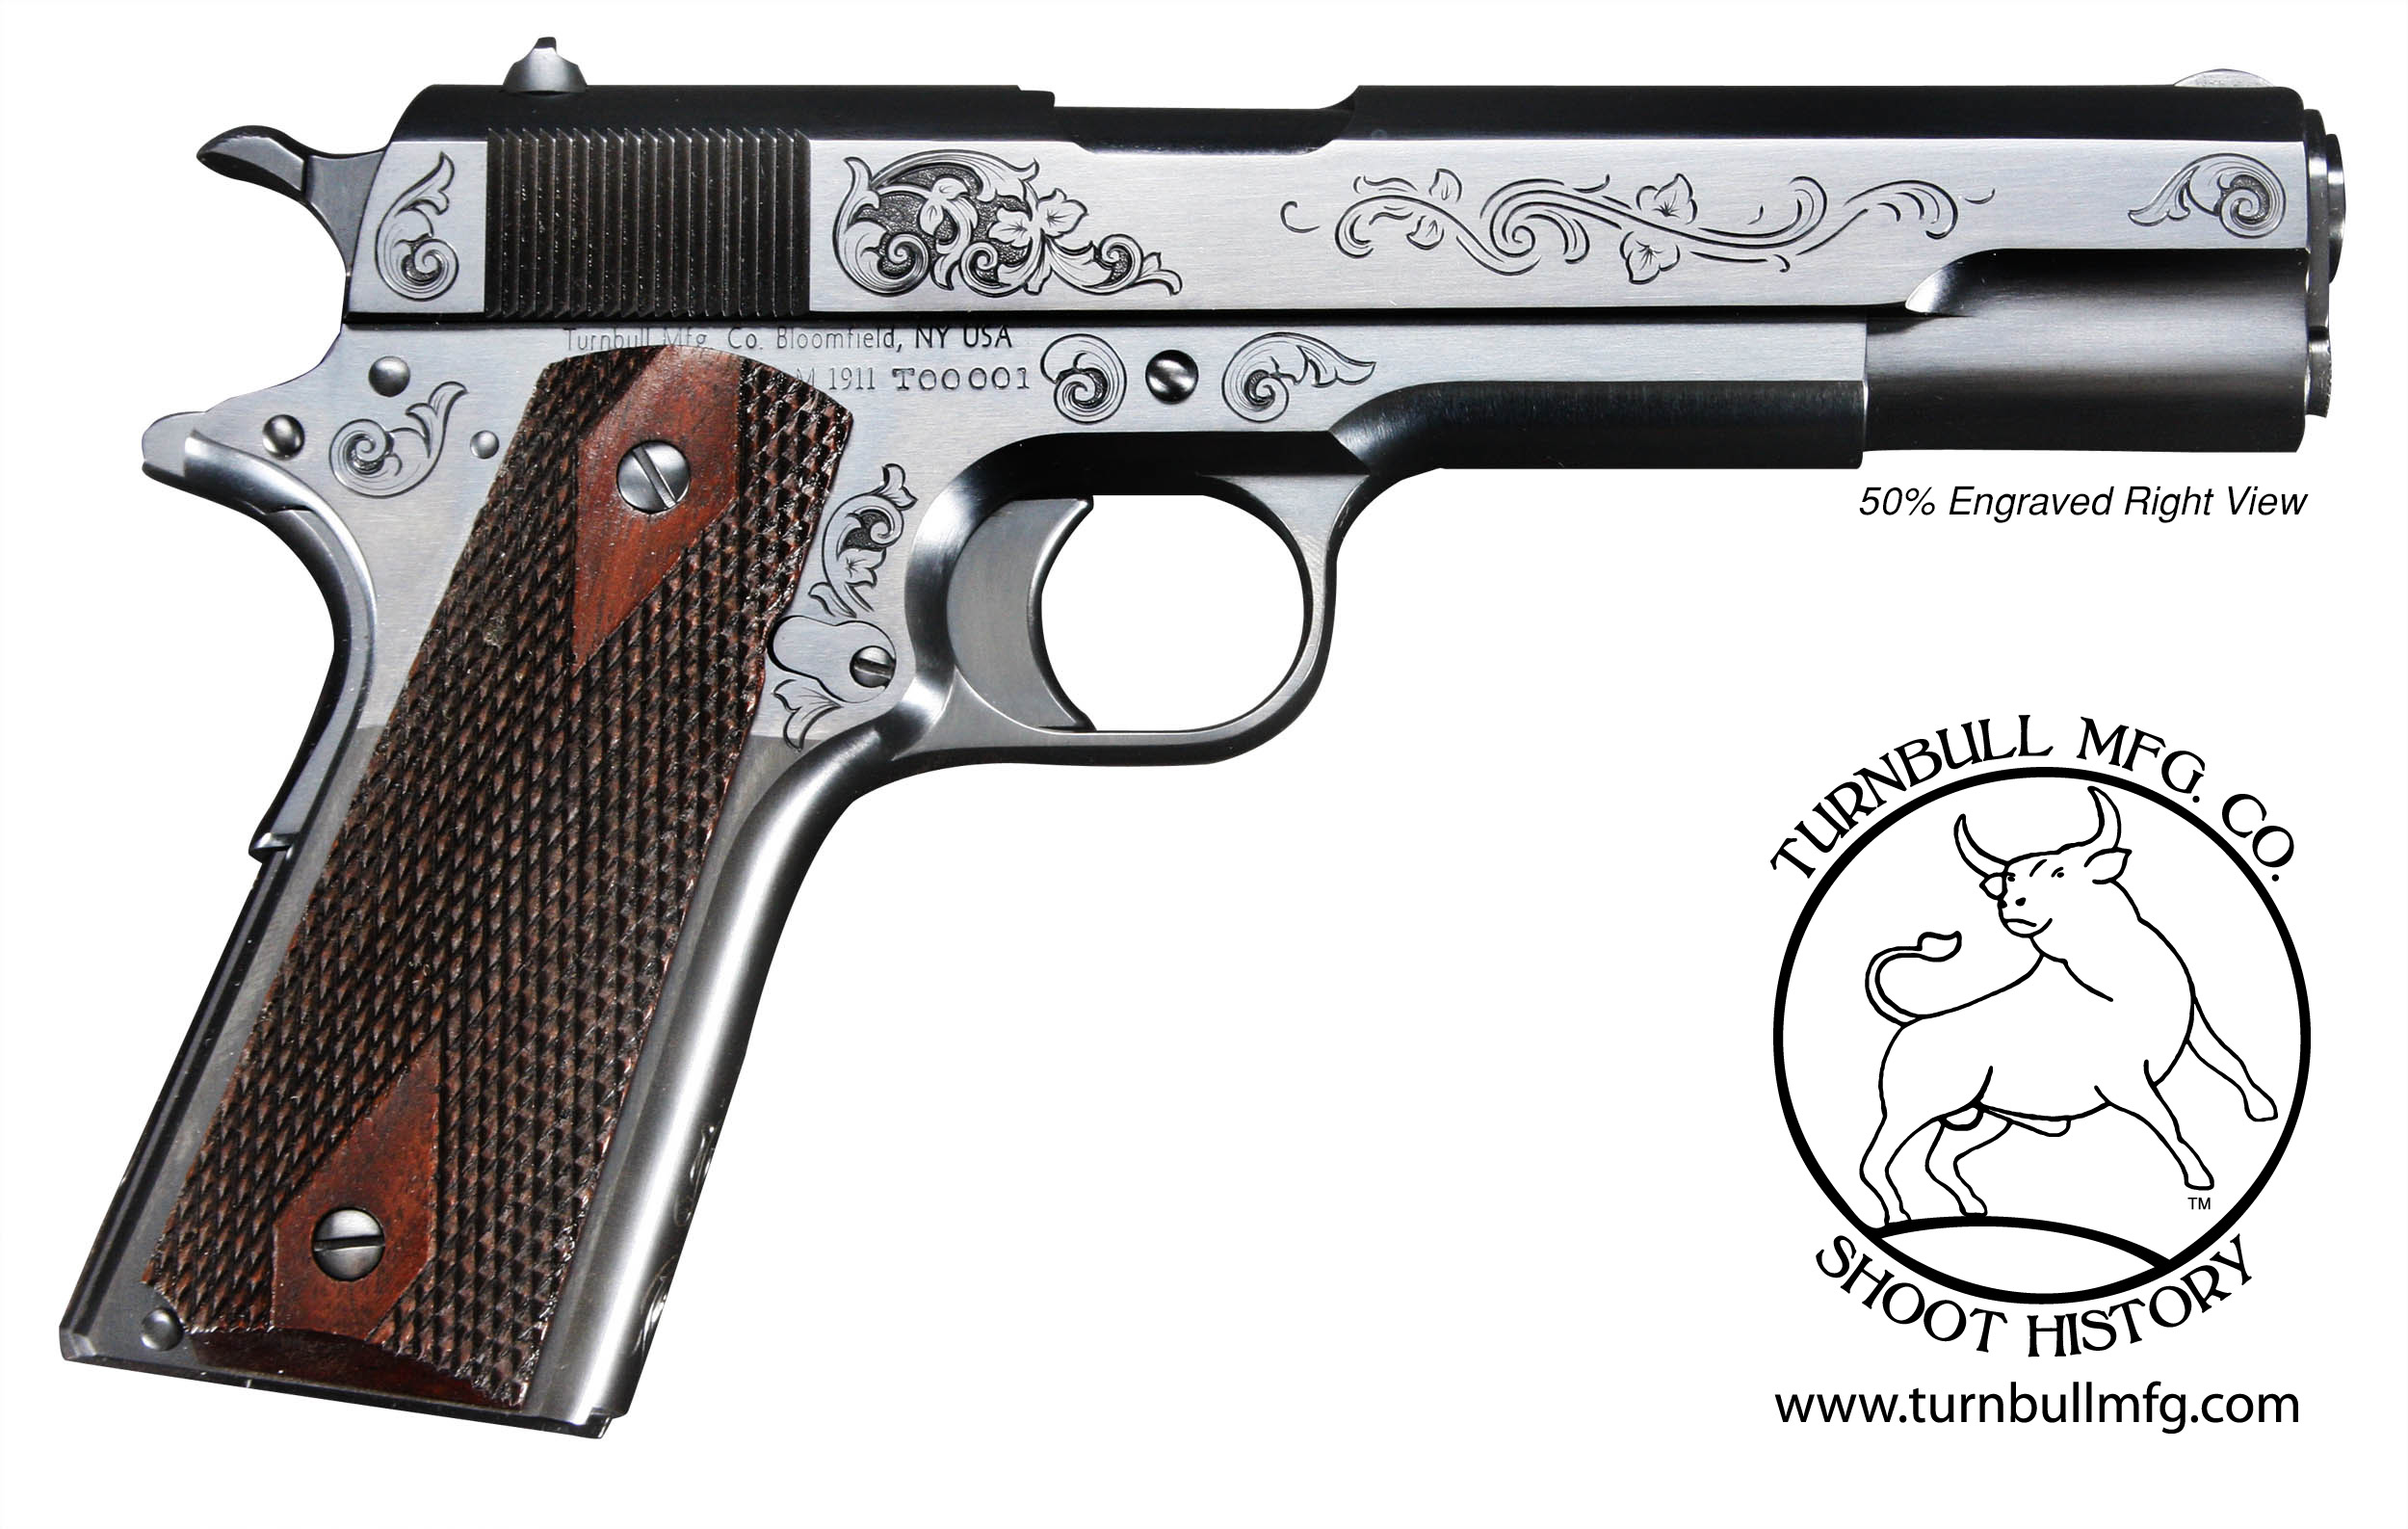 Turnbull Launches Engraving for New 1911 Pistols OutdoorHub